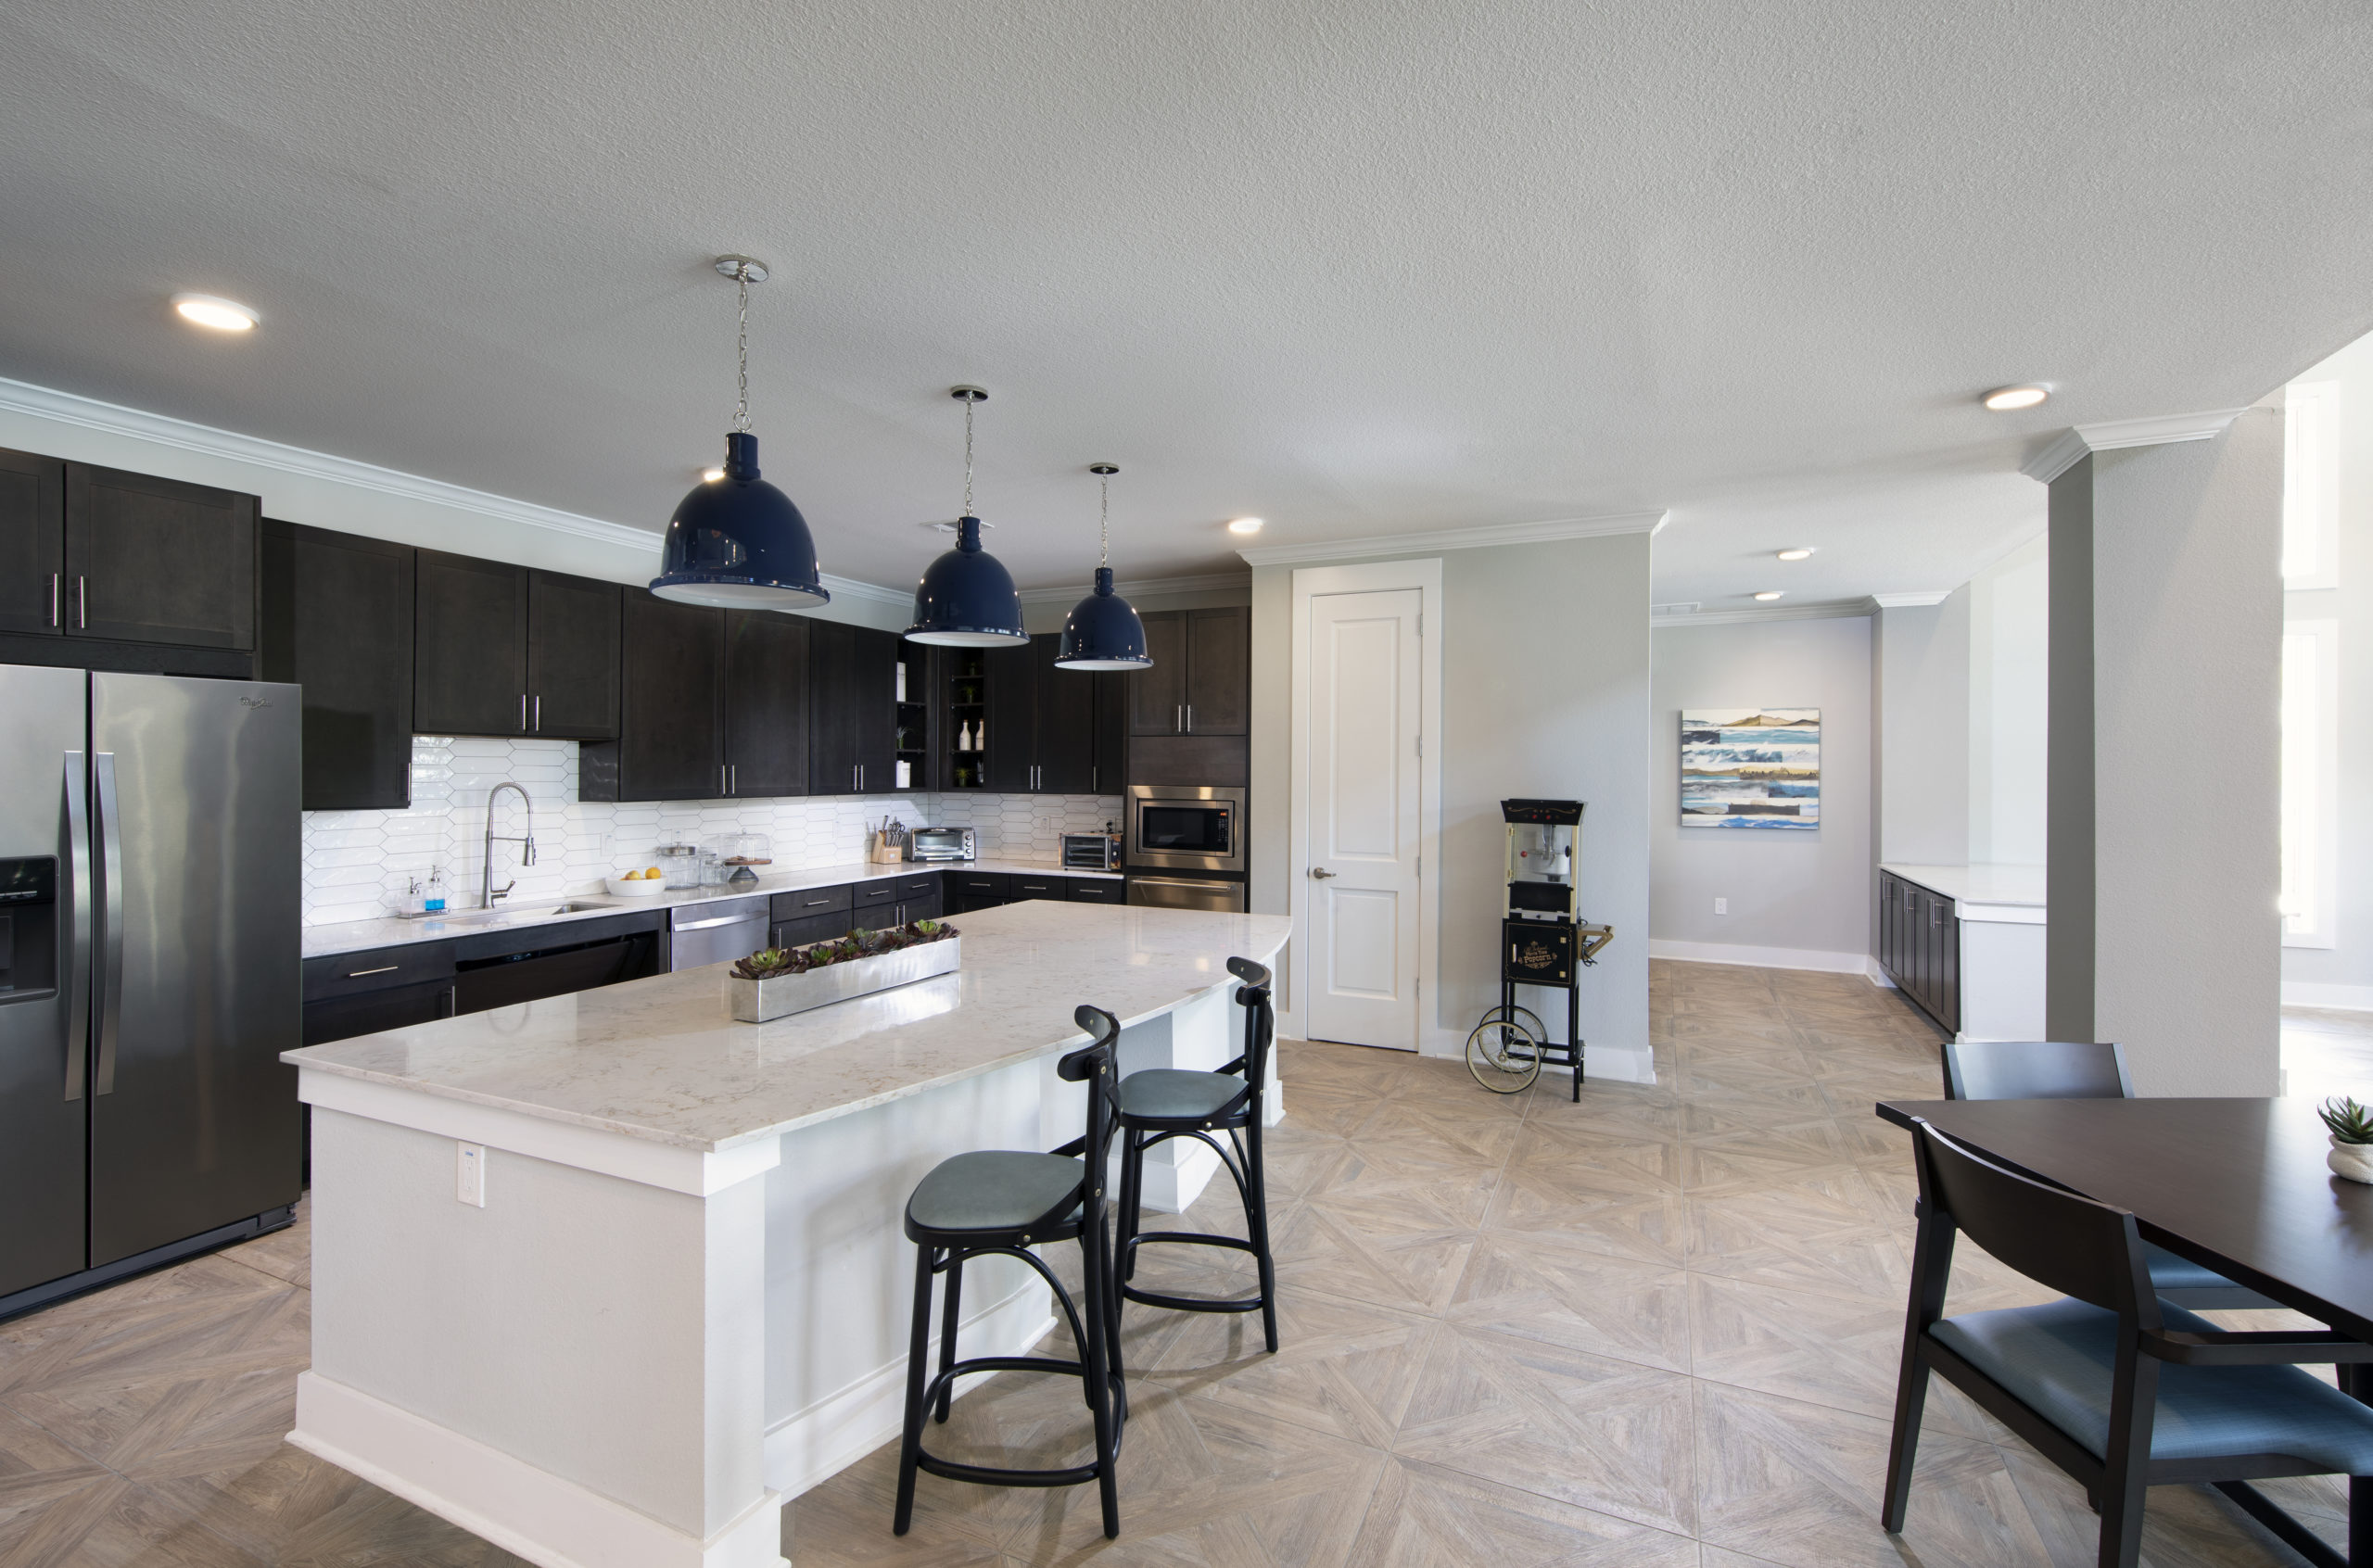 Community kitchen and coffee bar at Solea Keller Apartments in Fort Worth Texas